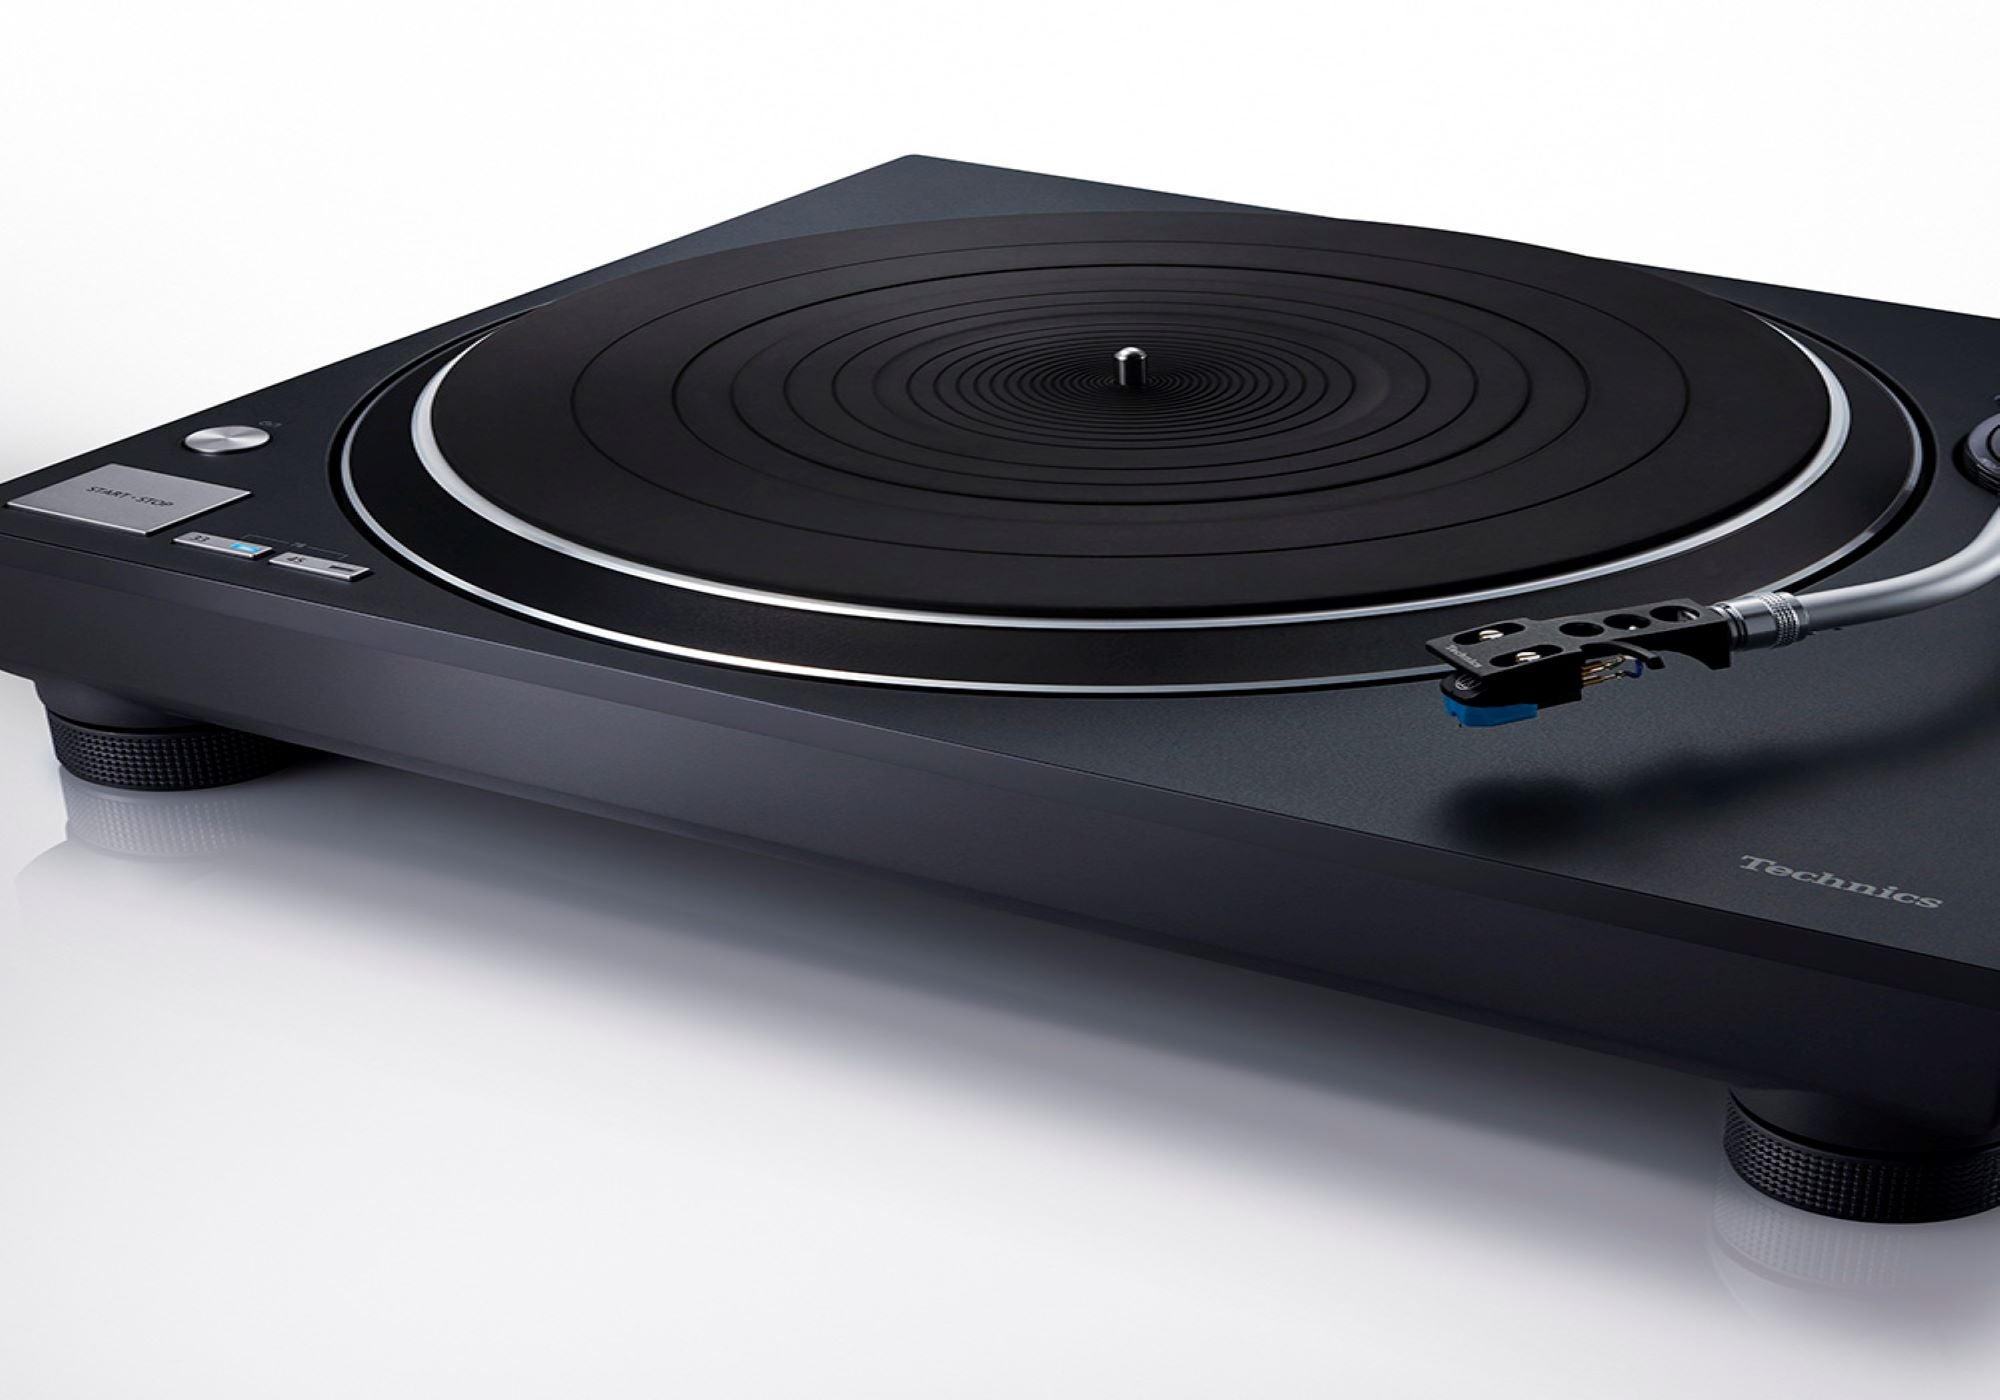 Technics debuts a more affordable turntable: $1,000 SL-100C